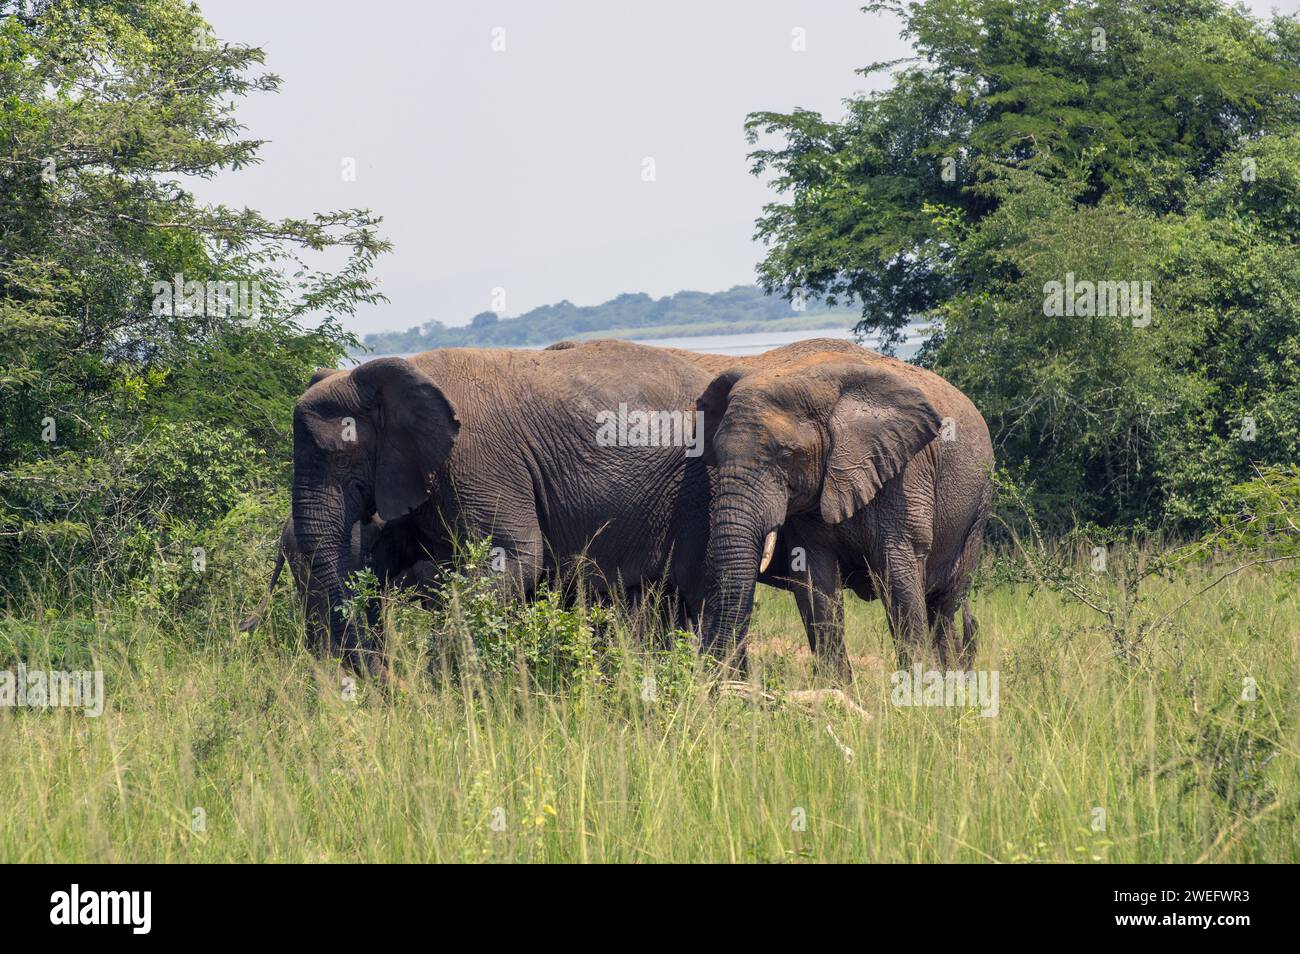 Large elephant with juvenile male elephant photographed on safari in Akagera National Park in Northeastern Rwanda, Central Africa Parks Stock Photo